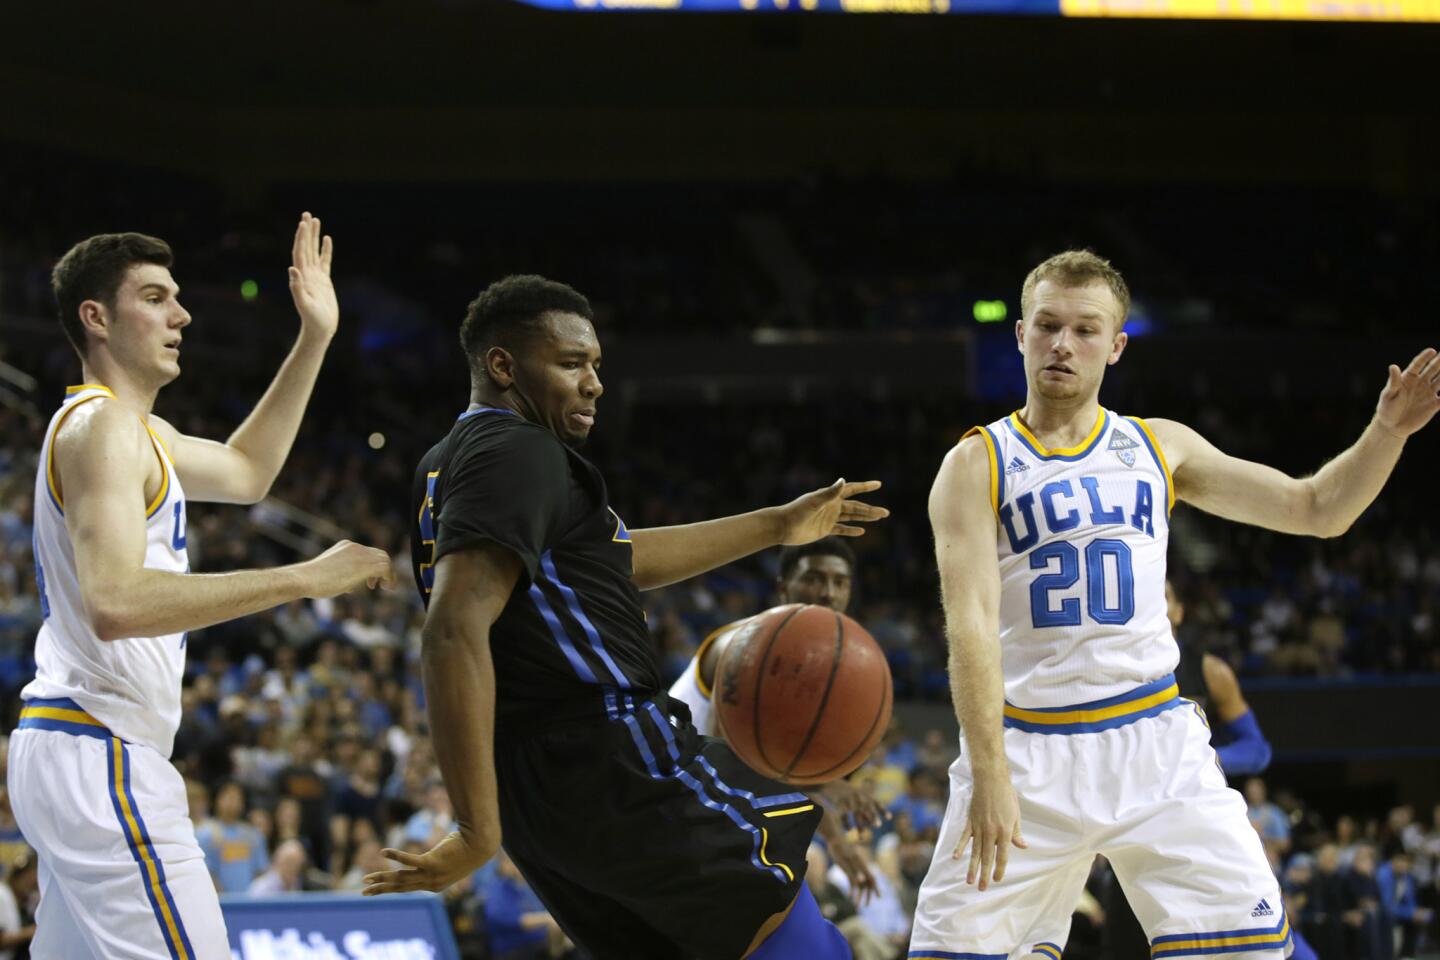 UCLA guard Bryce Alford steals the ball from Gauchos forward Jalen Canty during first half action at Pauley Pavilion.